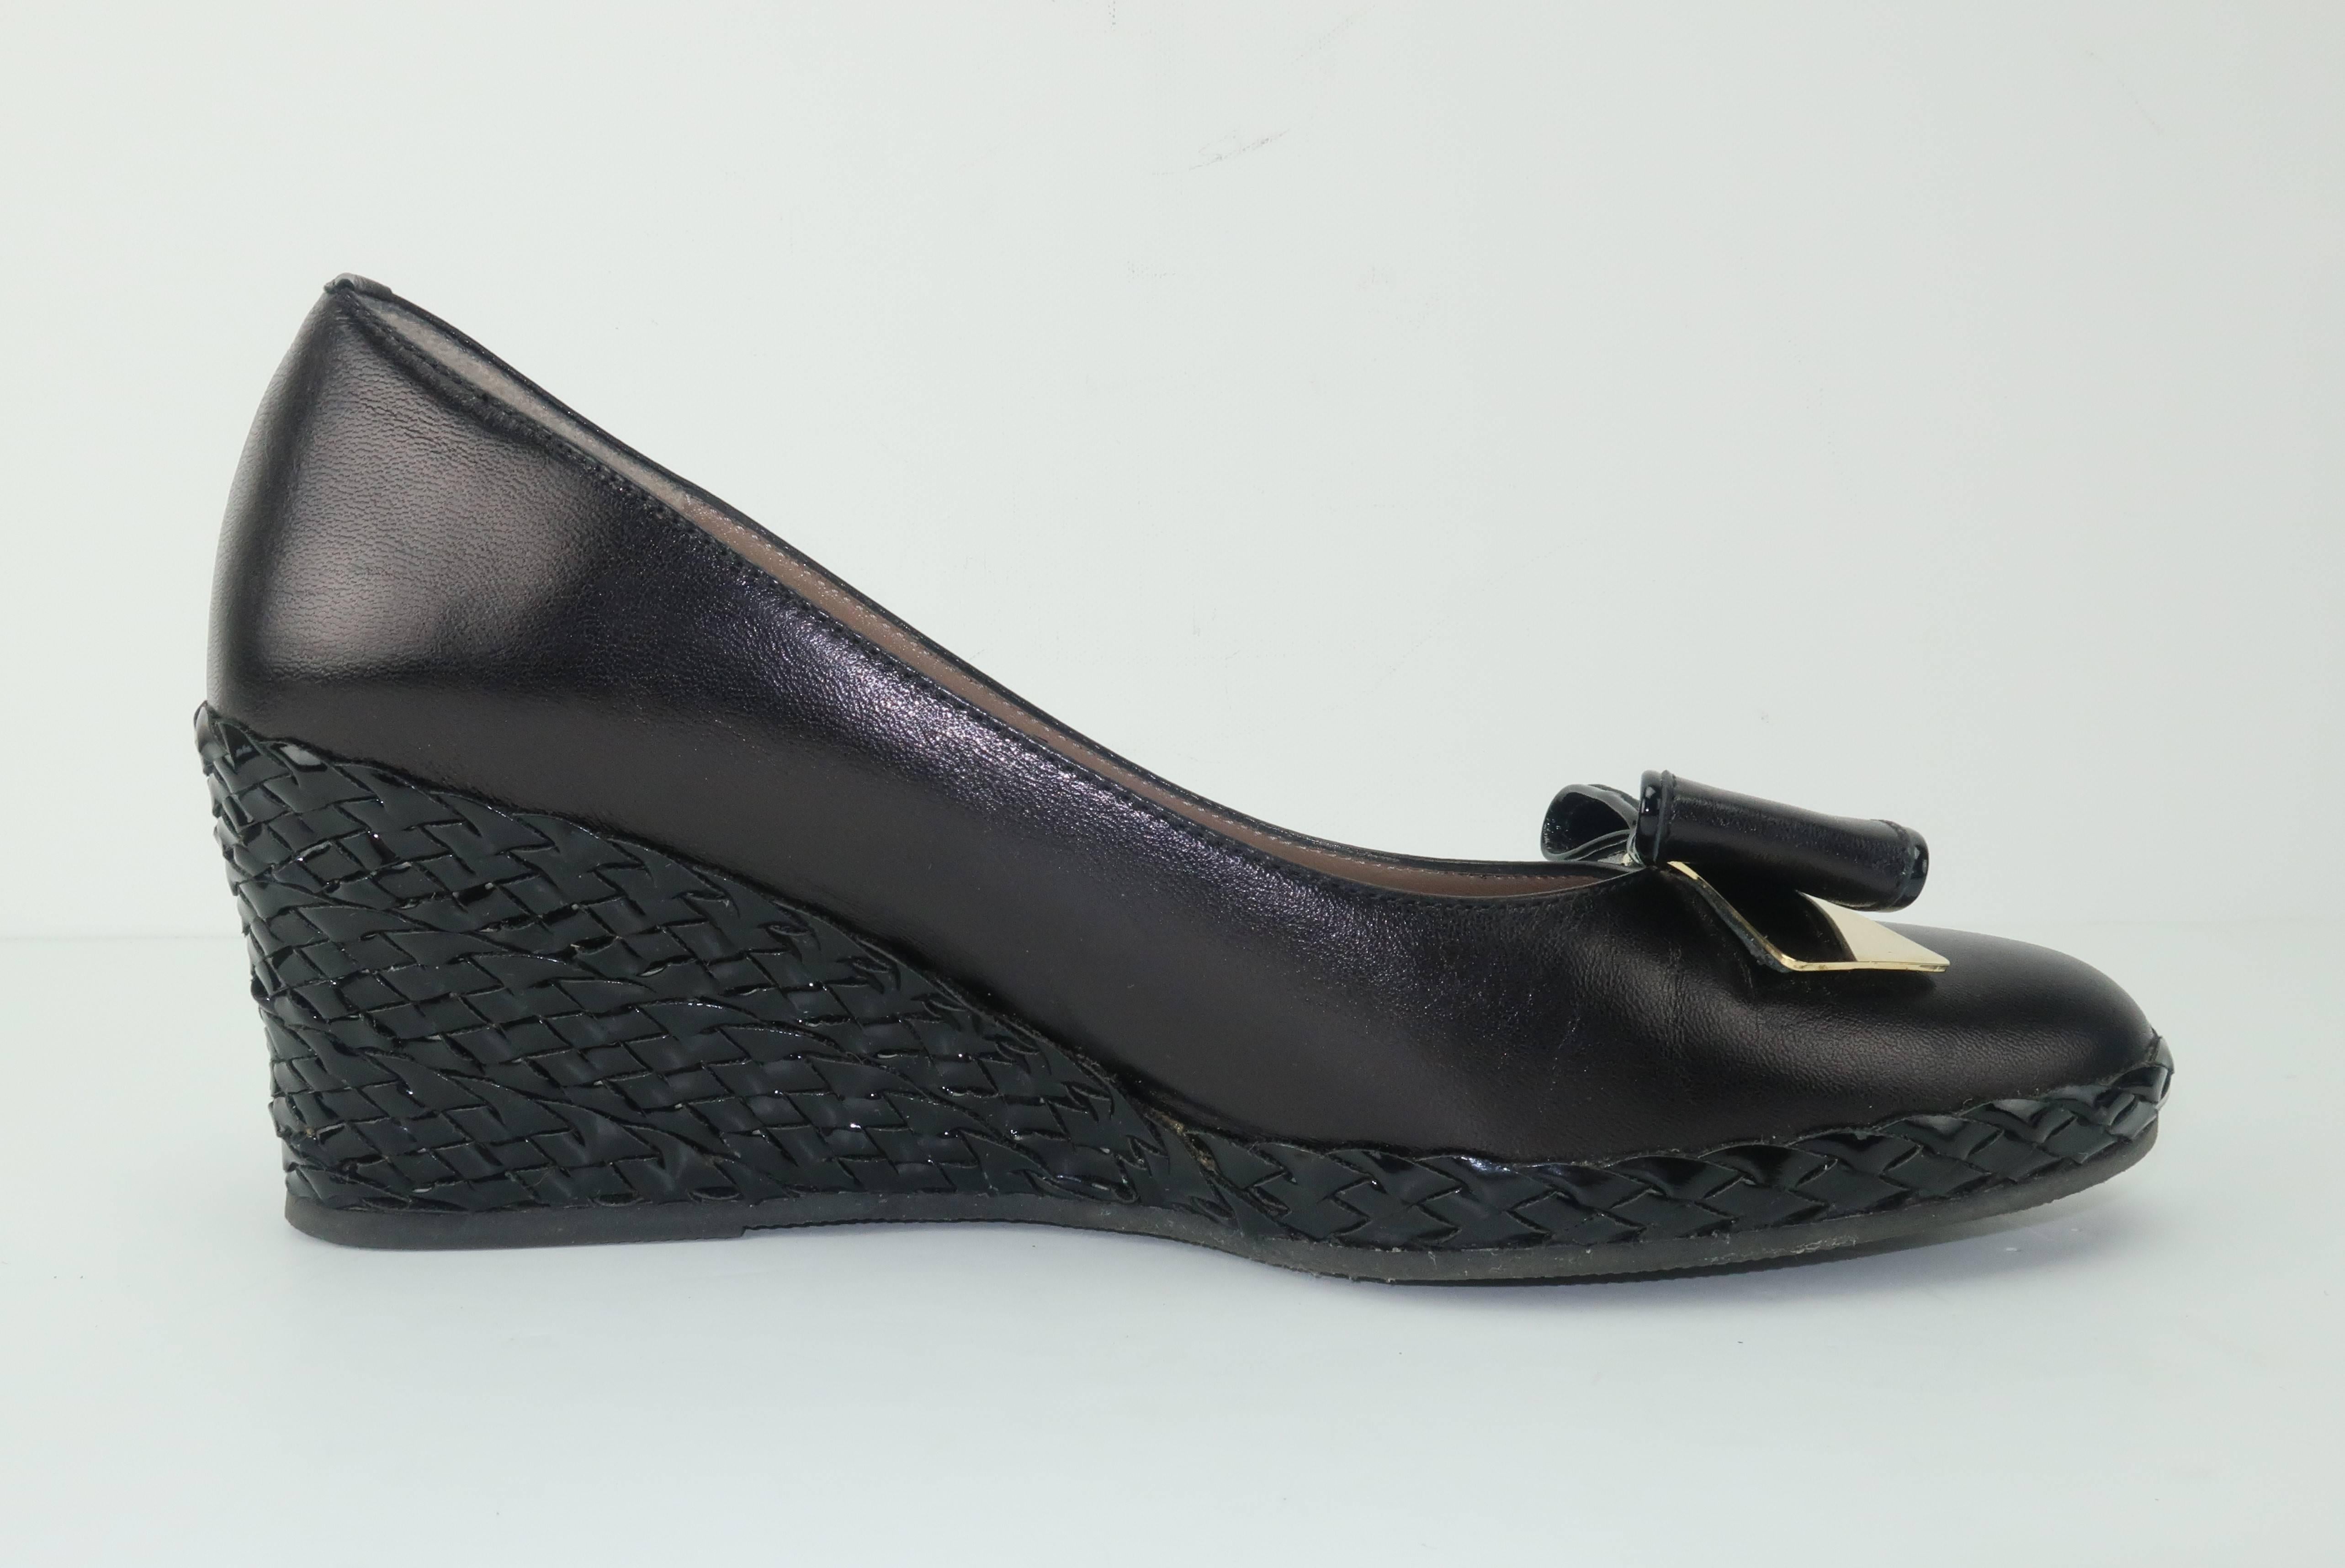 Bruno Magli Black Leather Wedge Shoes With Bow Tie Detail Sz 37 2